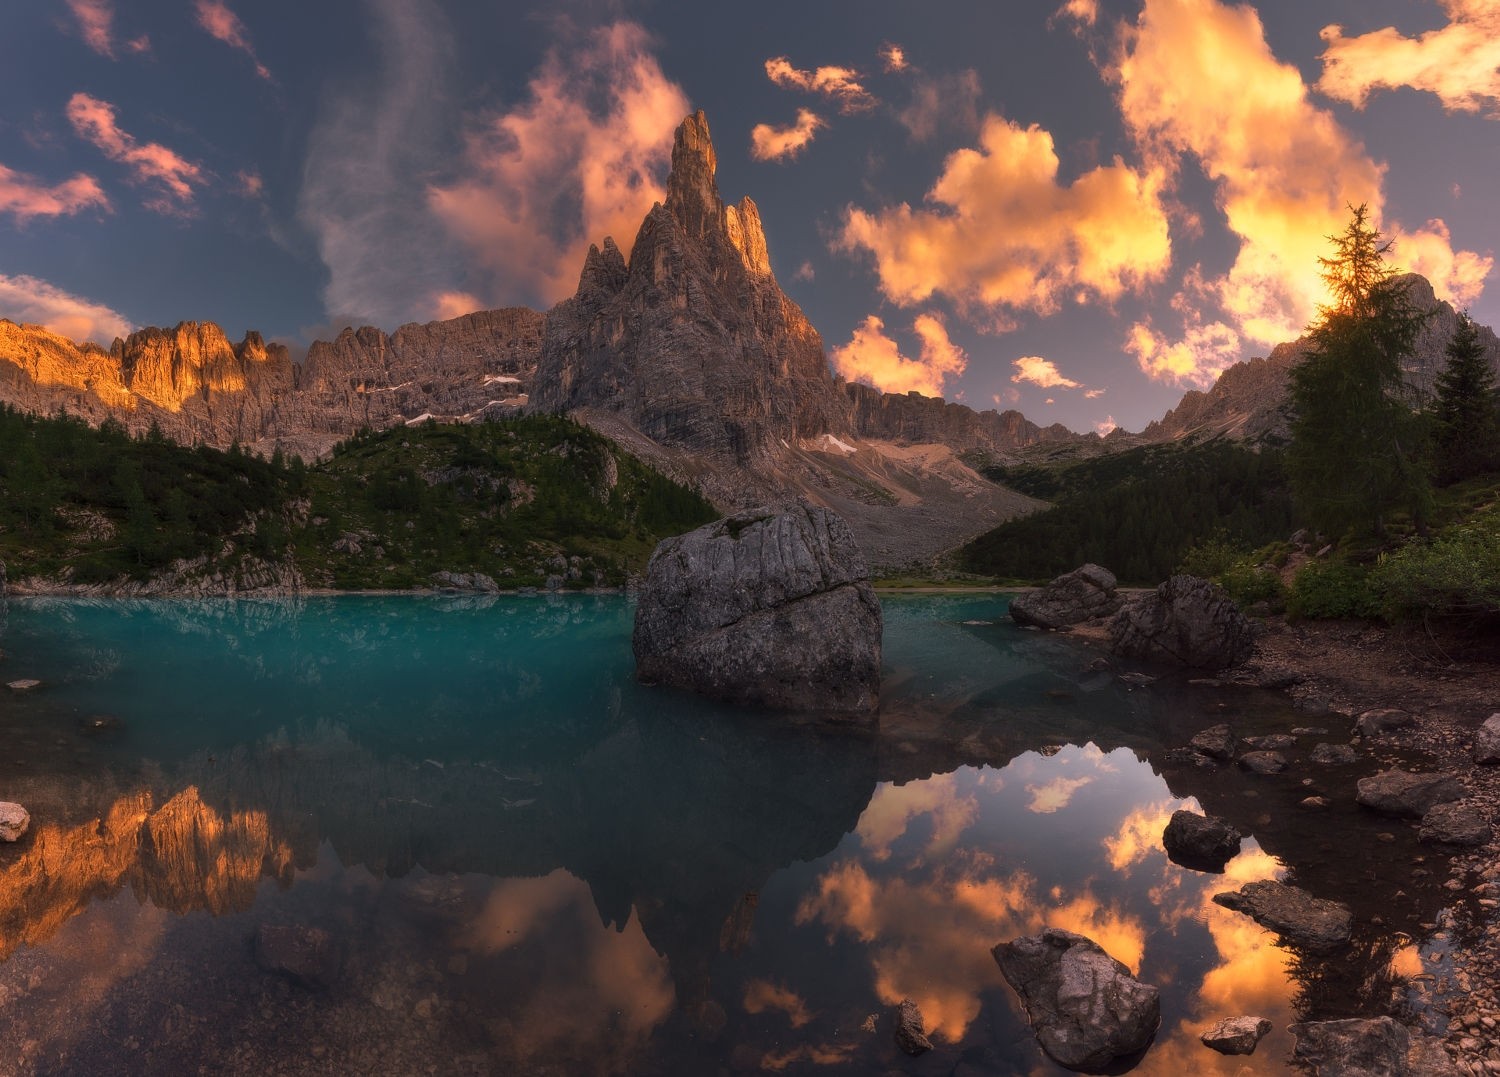 photography, Nature, Landscape, Summer, Sunset, Lake, Reflection, Calm waters, Mountains, Trees, Sunlight, Alps, Italy Wallpaper